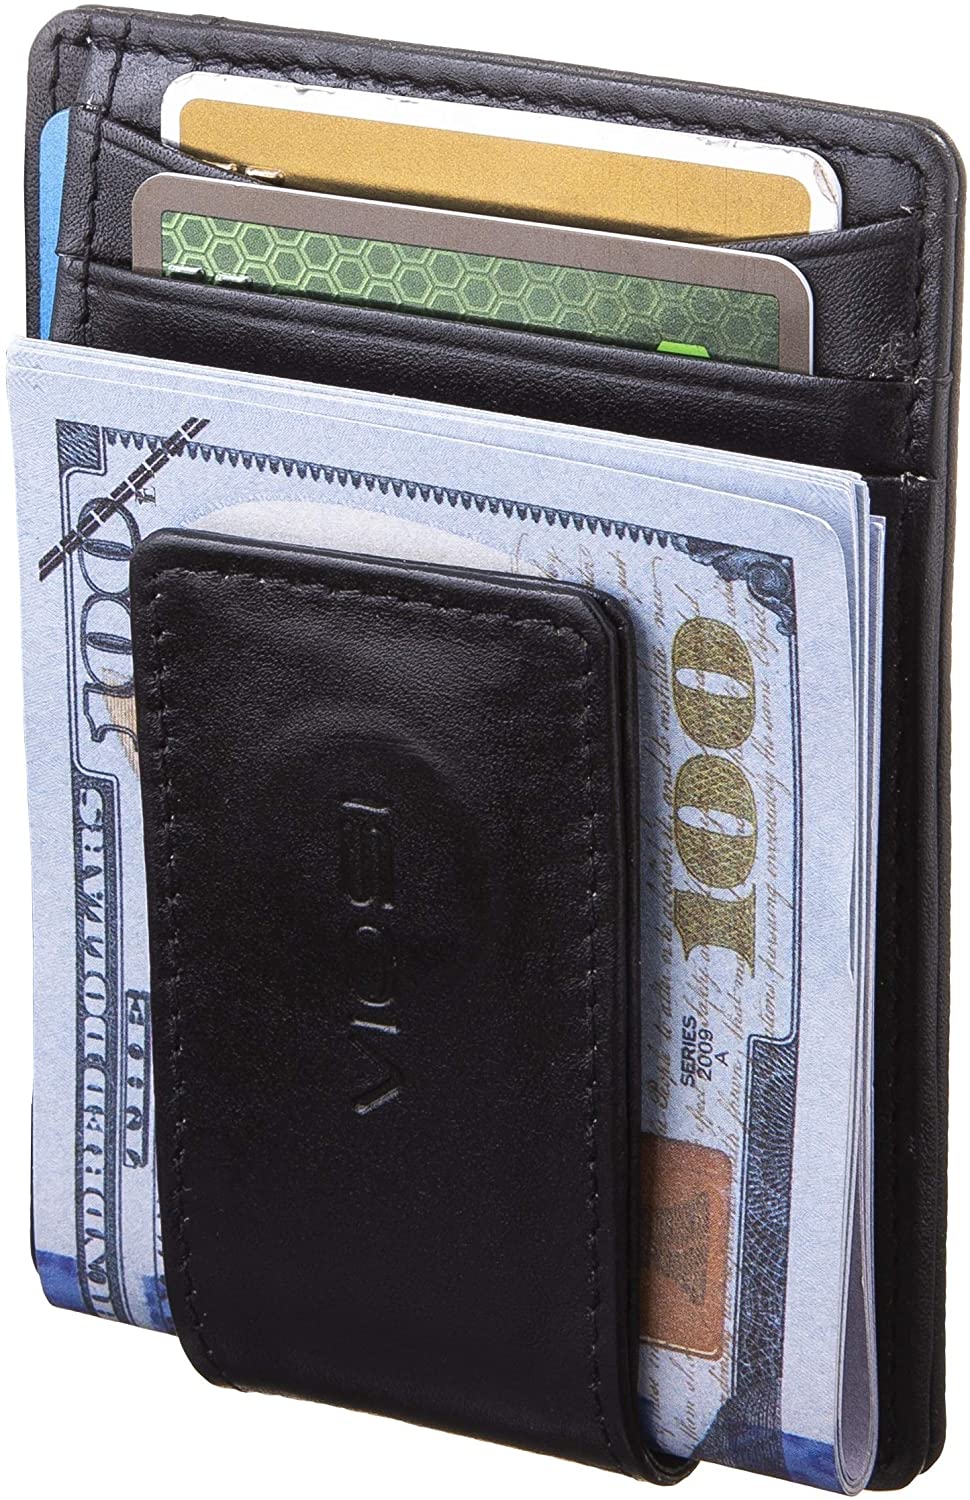 Buy Wholesale China Custom Rfid Silm Magnetic Leather Money Clip Wallet  Luxury Credit Card Holder For Men & Silm Magnetic Leather Money Clip Wallet  at USD 2.49